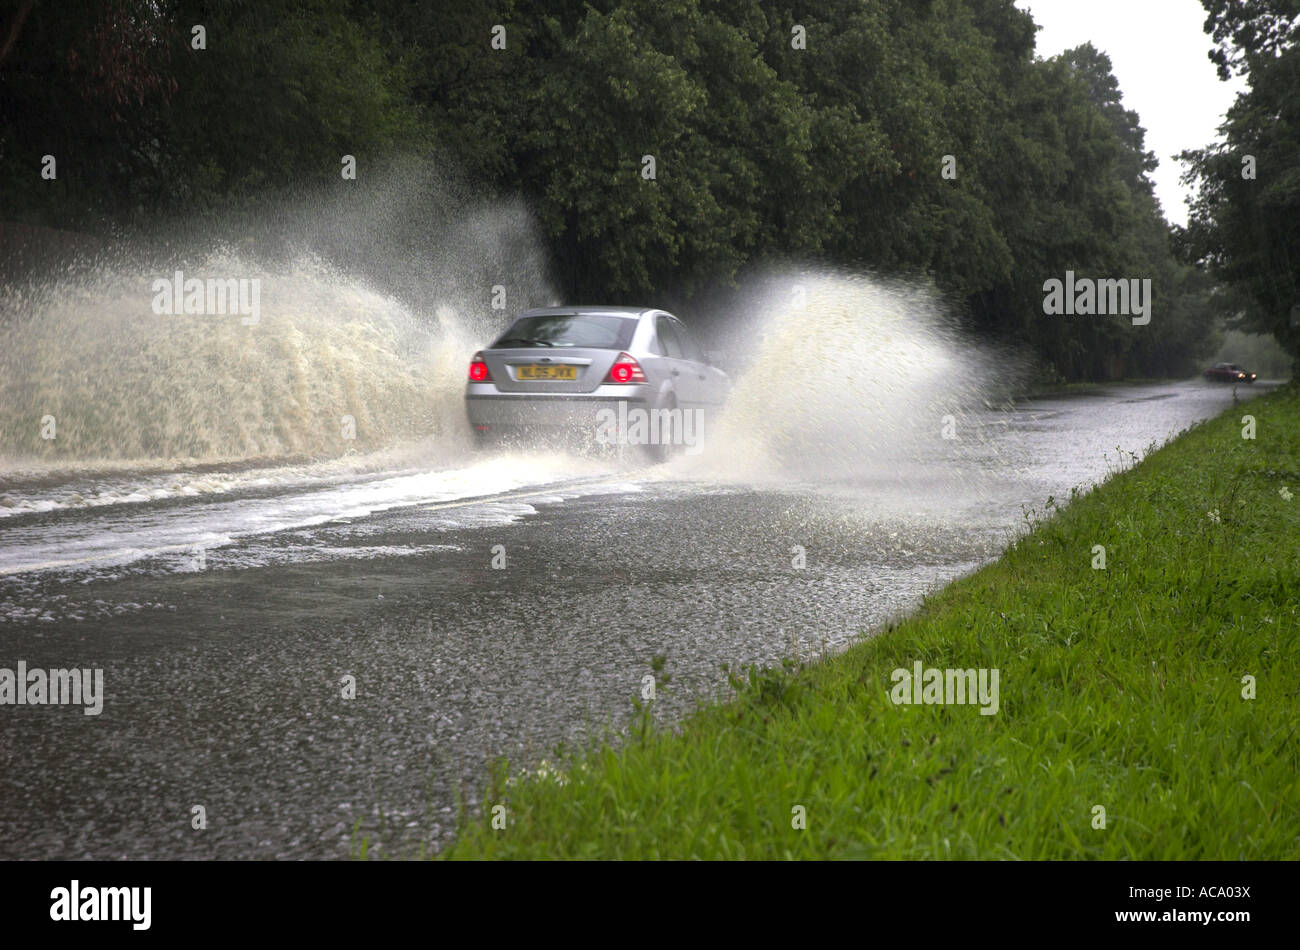 Car driving through flooded road spraying water after heavy rain Stock Photo